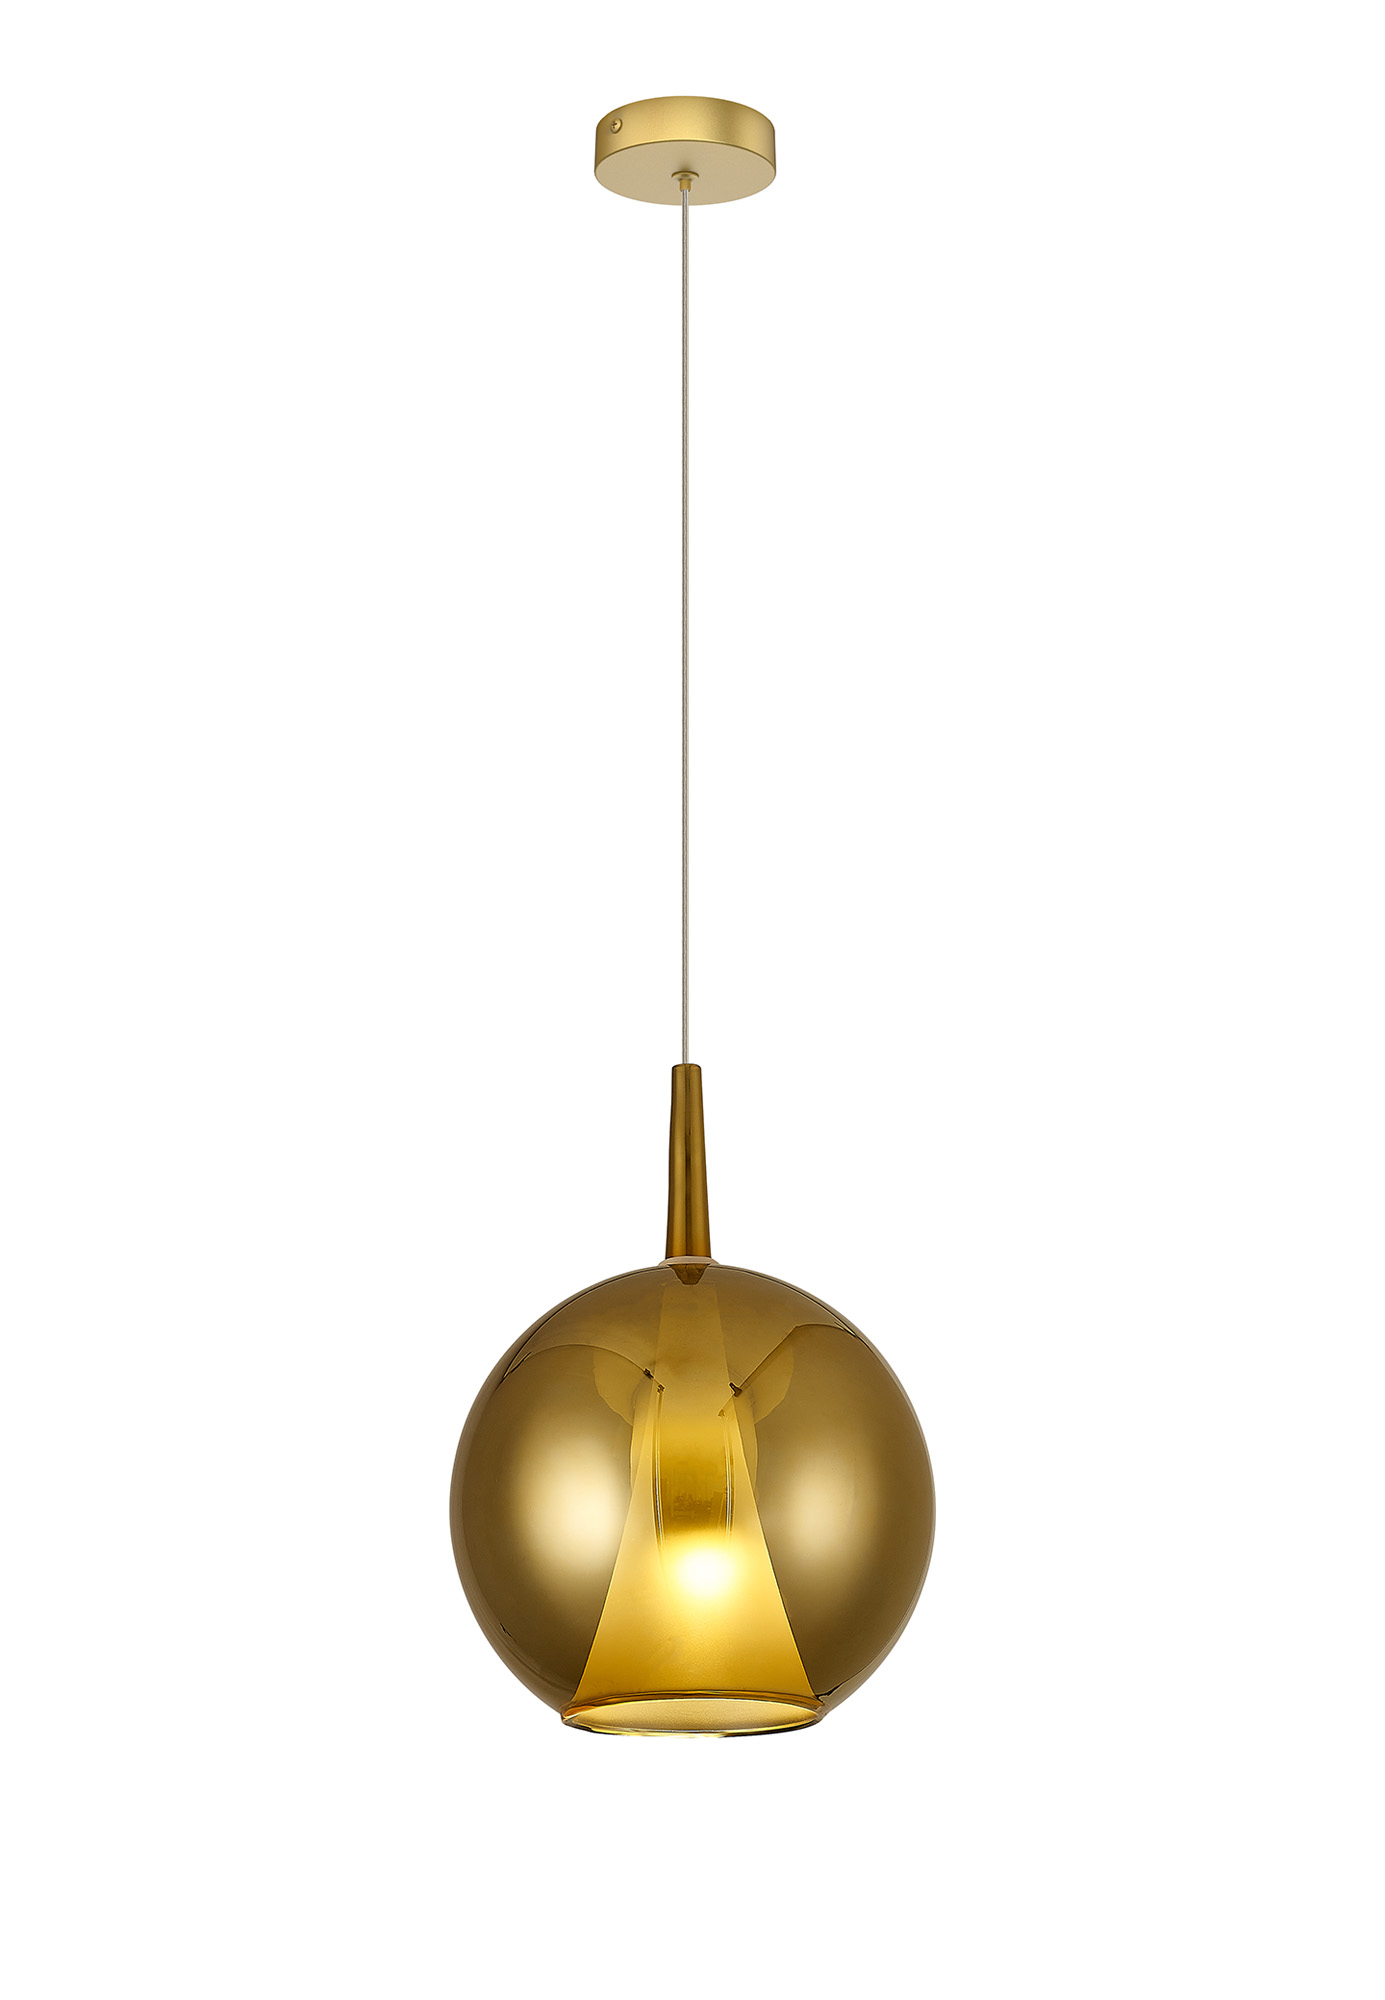 MK0001  Elsa Single Pendant With Round Double Shade, 1 Light E27, Gold/Frosted